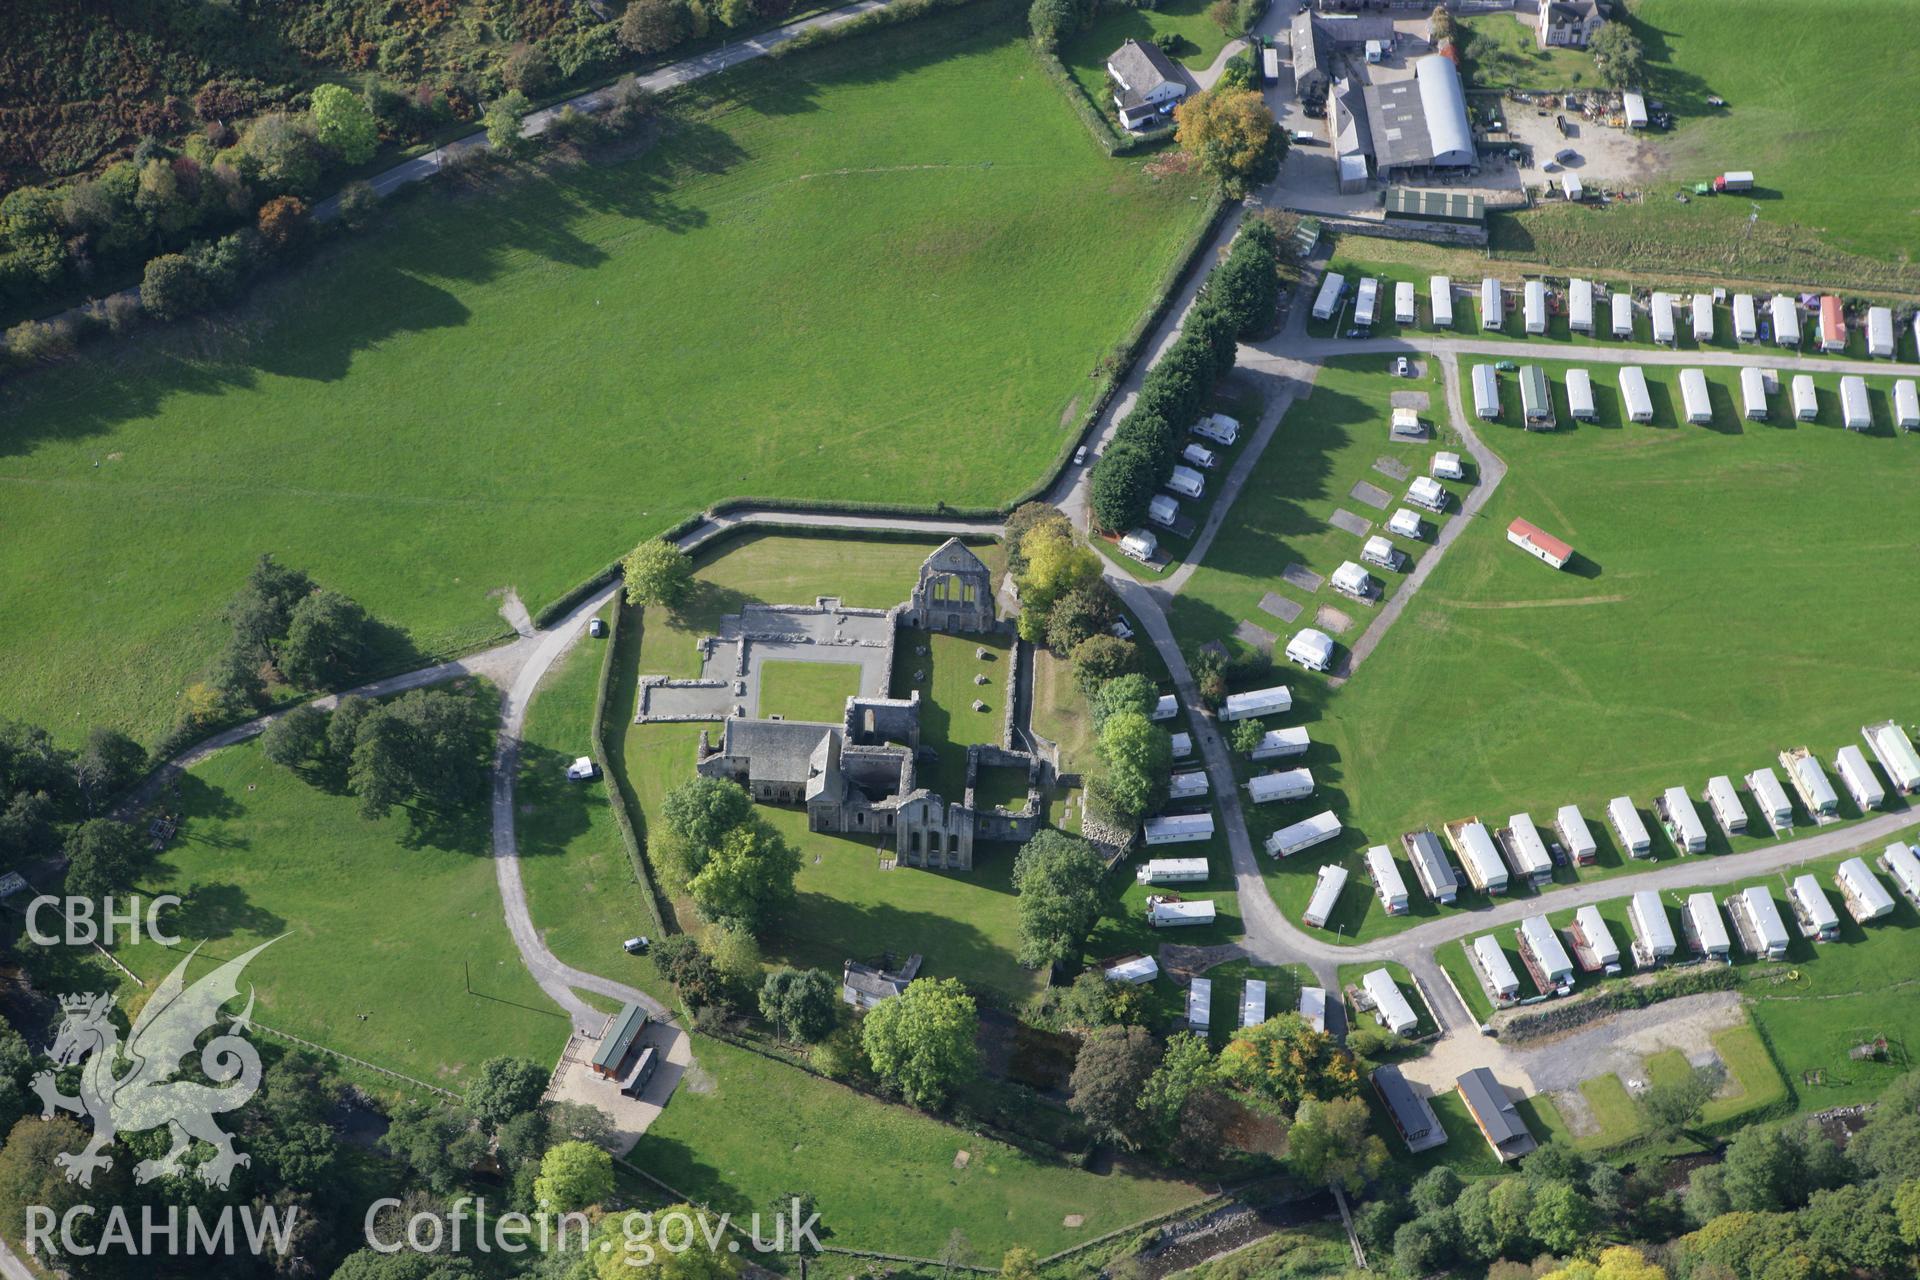 RCAHMW colour oblique aerial photograph of Valle Crucis Abbey. Taken on 13 October 2009 by Toby Driver